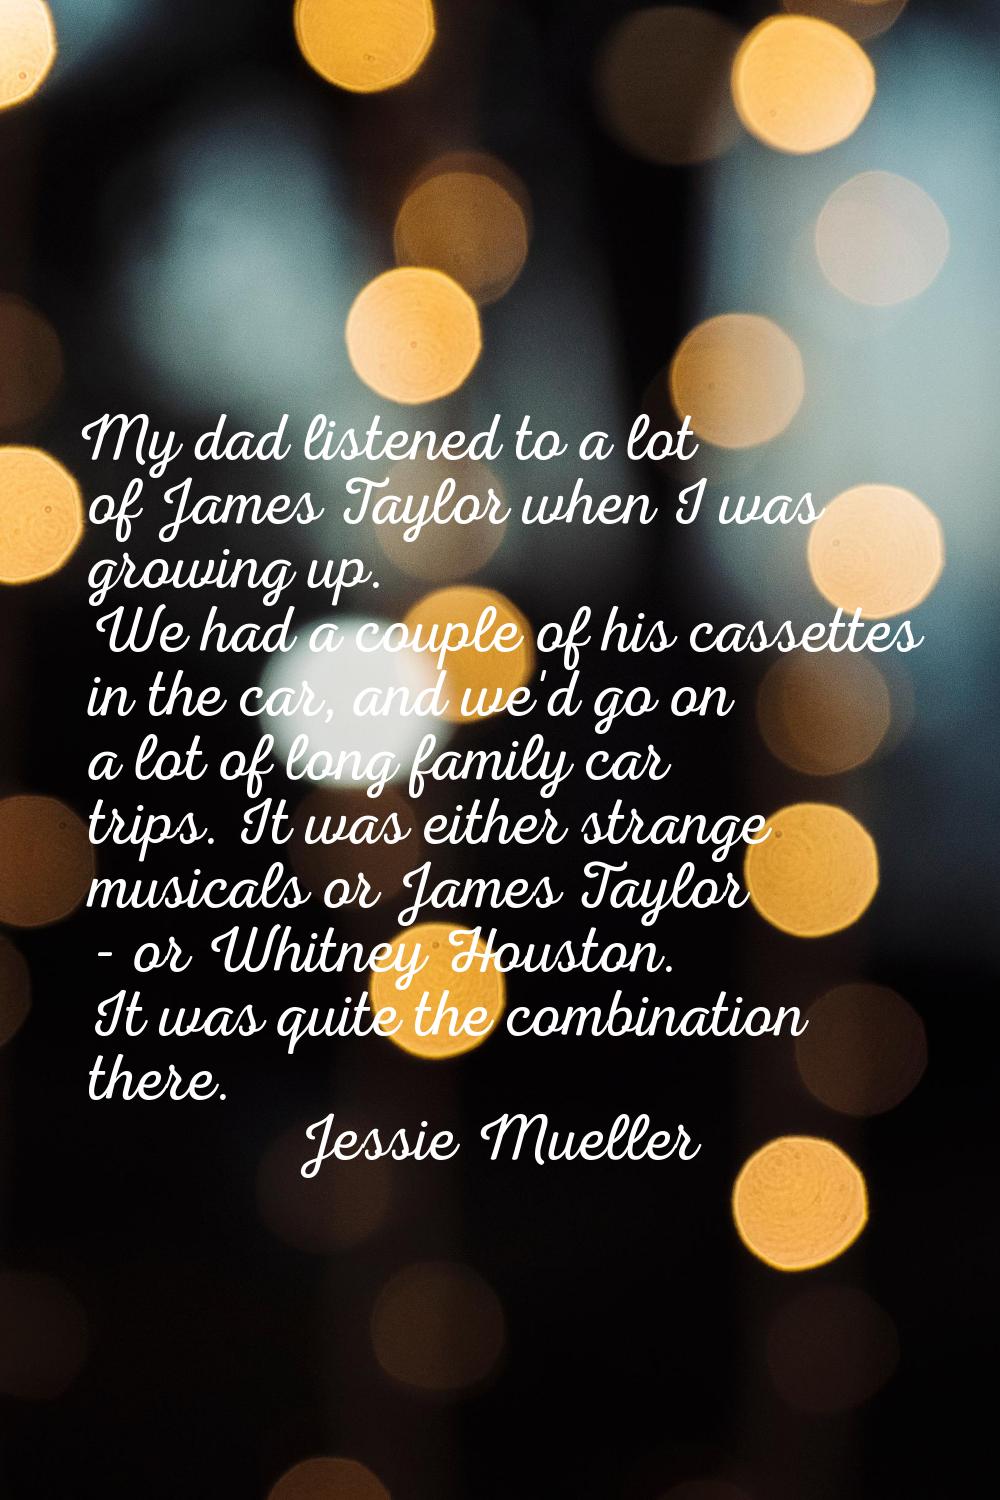 My dad listened to a lot of James Taylor when I was growing up. We had a couple of his cassettes in